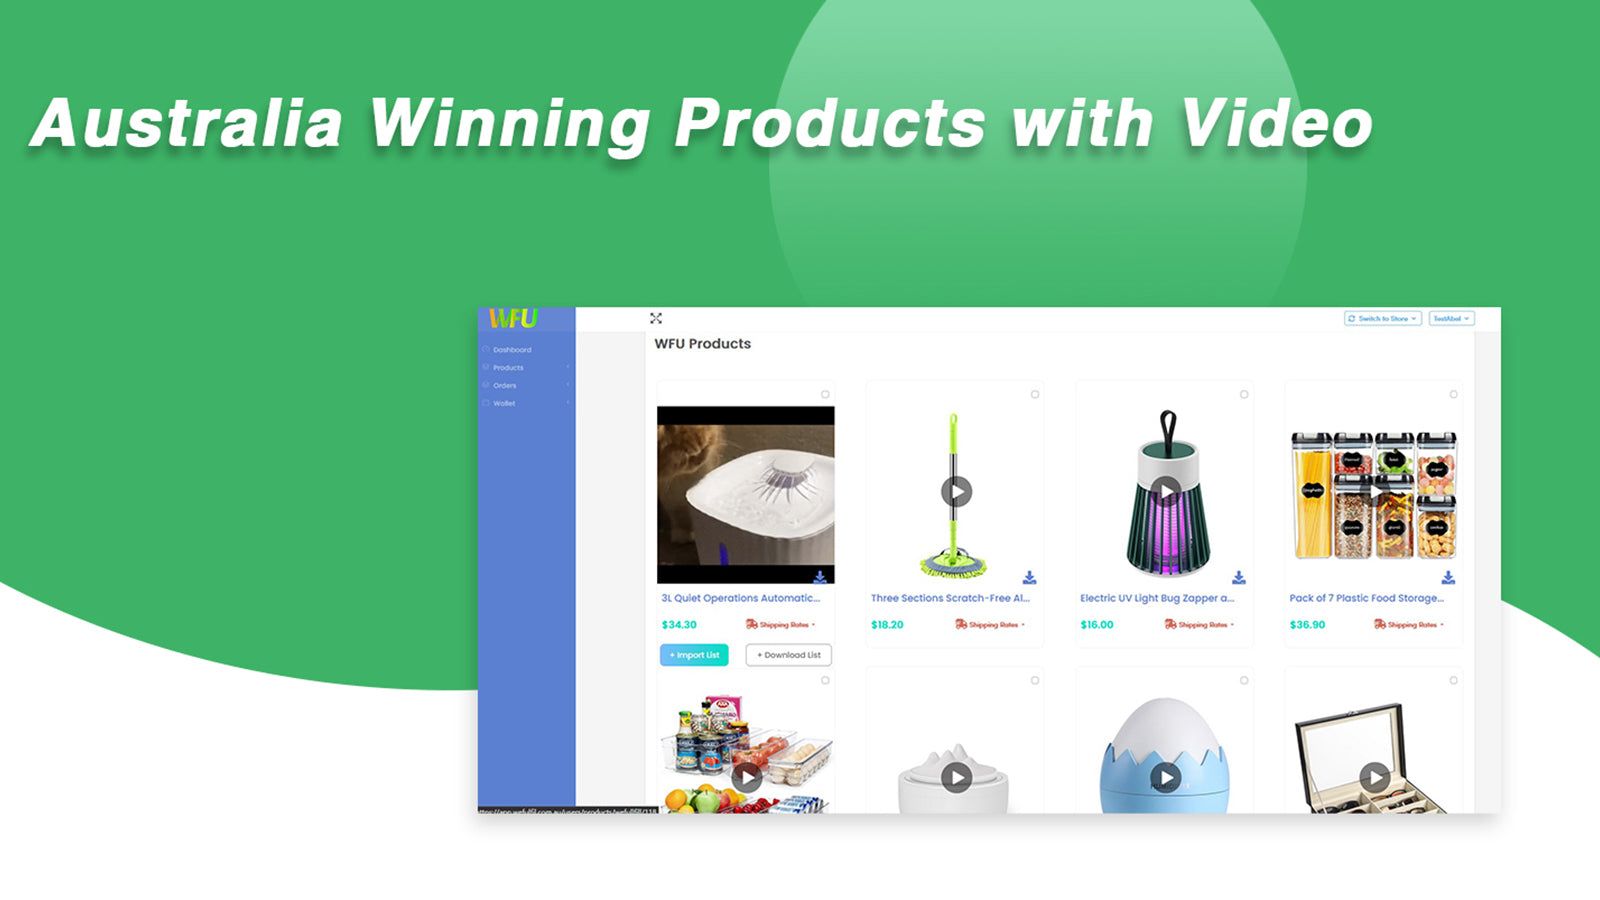 Australia Winning Products with Video